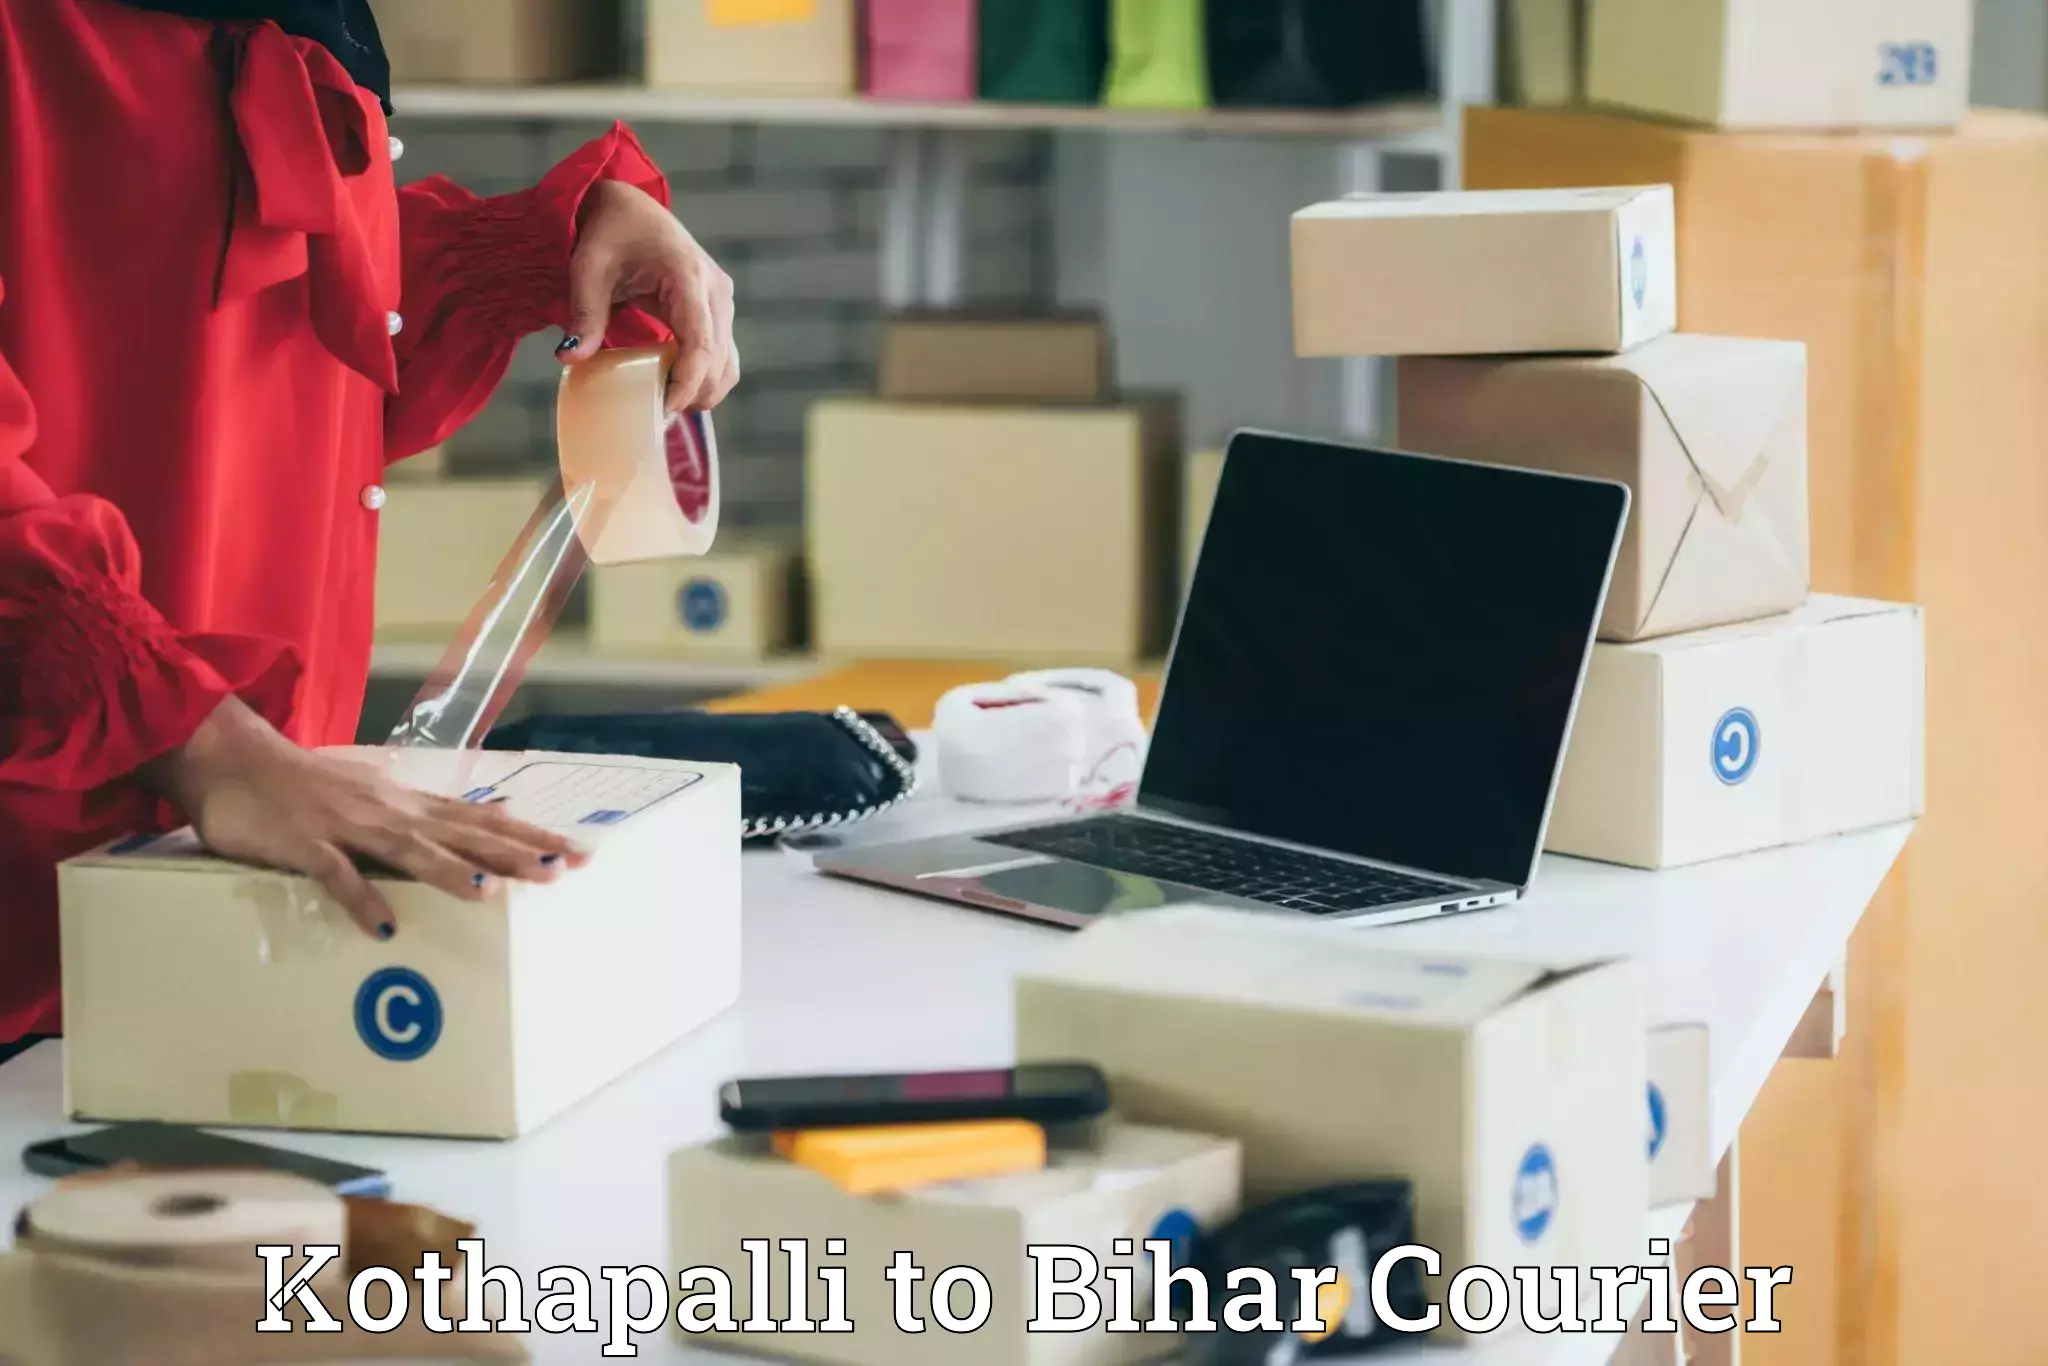 State-of-the-art courier technology Kothapalli to Dhaka